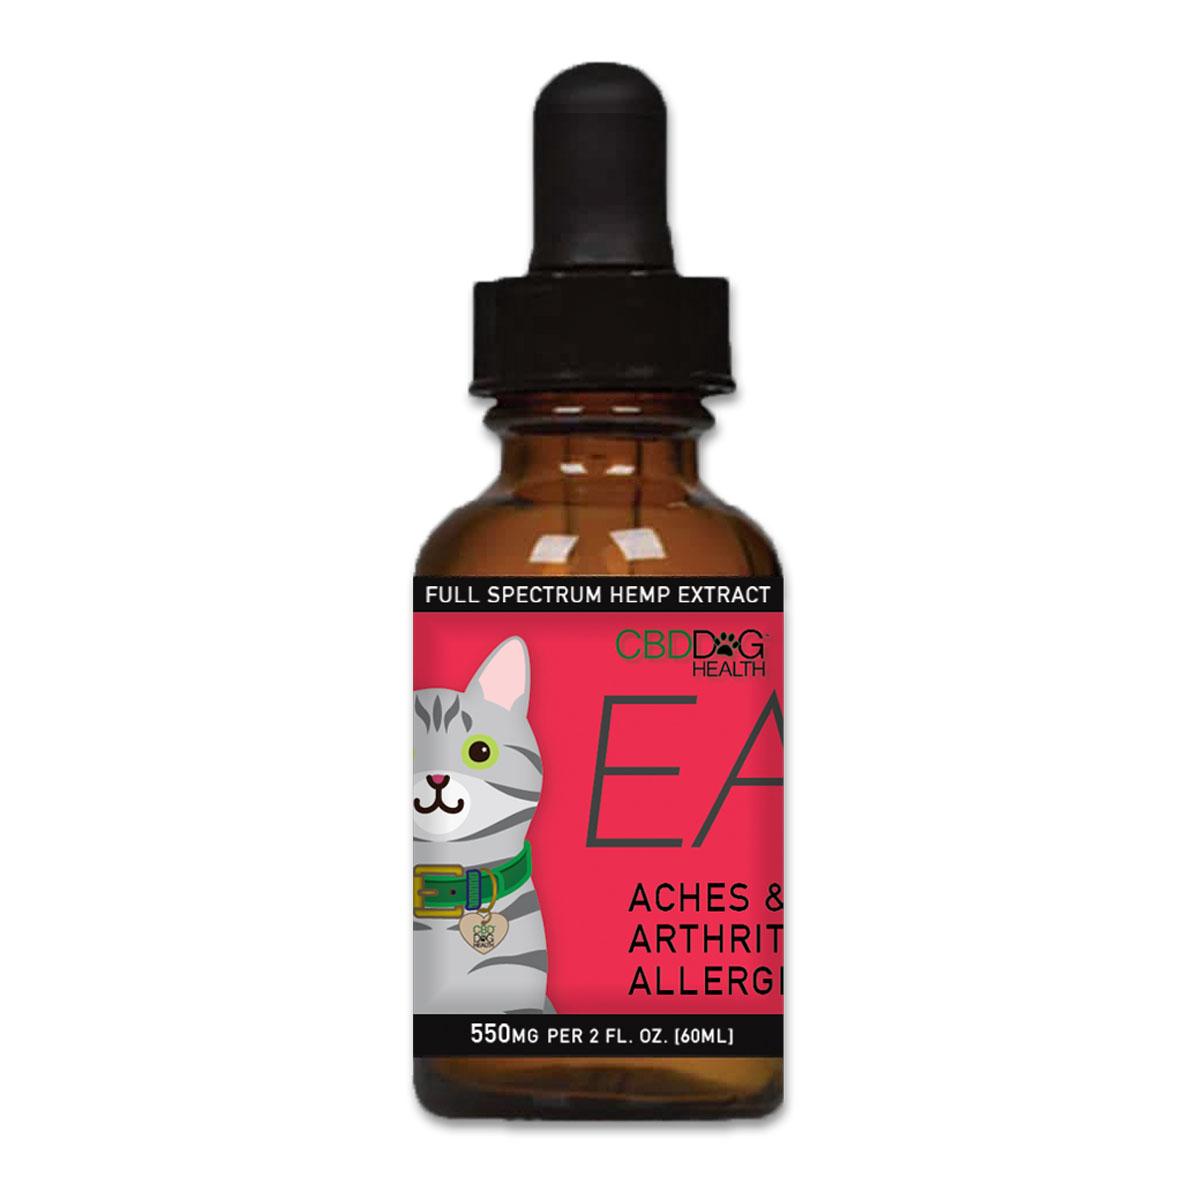 CBD Dog Health EASE - 550 mg Full Spectrum Hemp Extract for Cats with Turmeric & Frankincense 